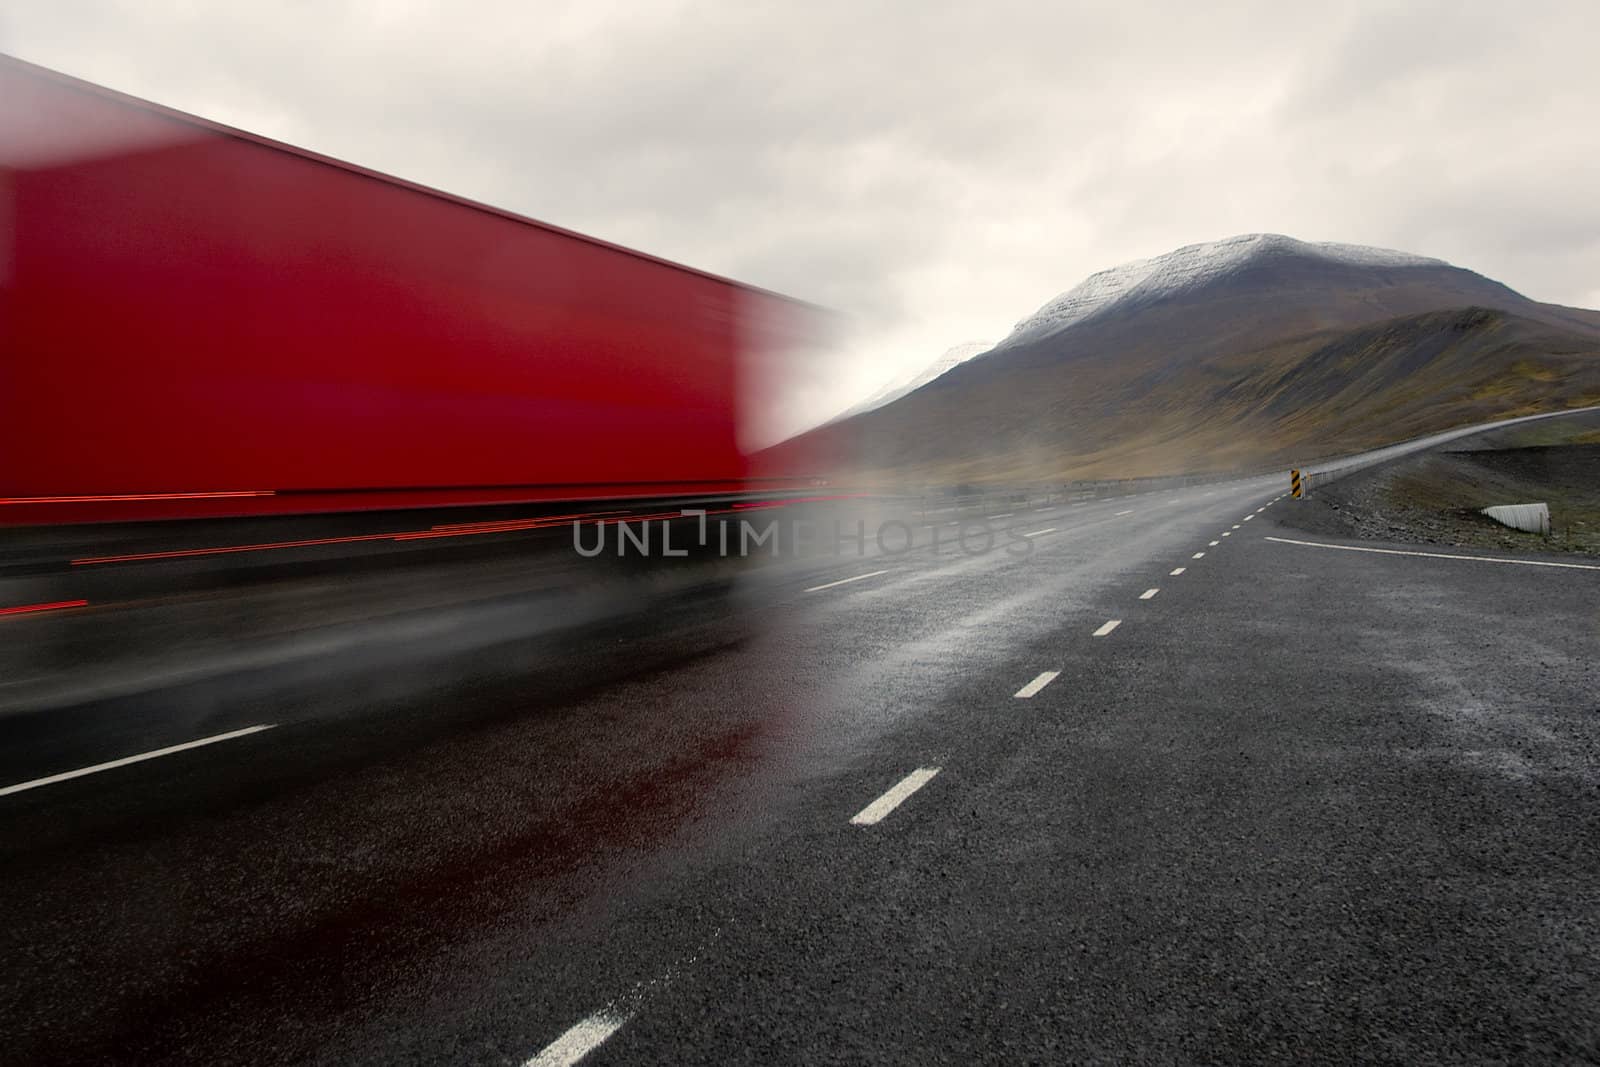 Moving red truck  by t3mujin